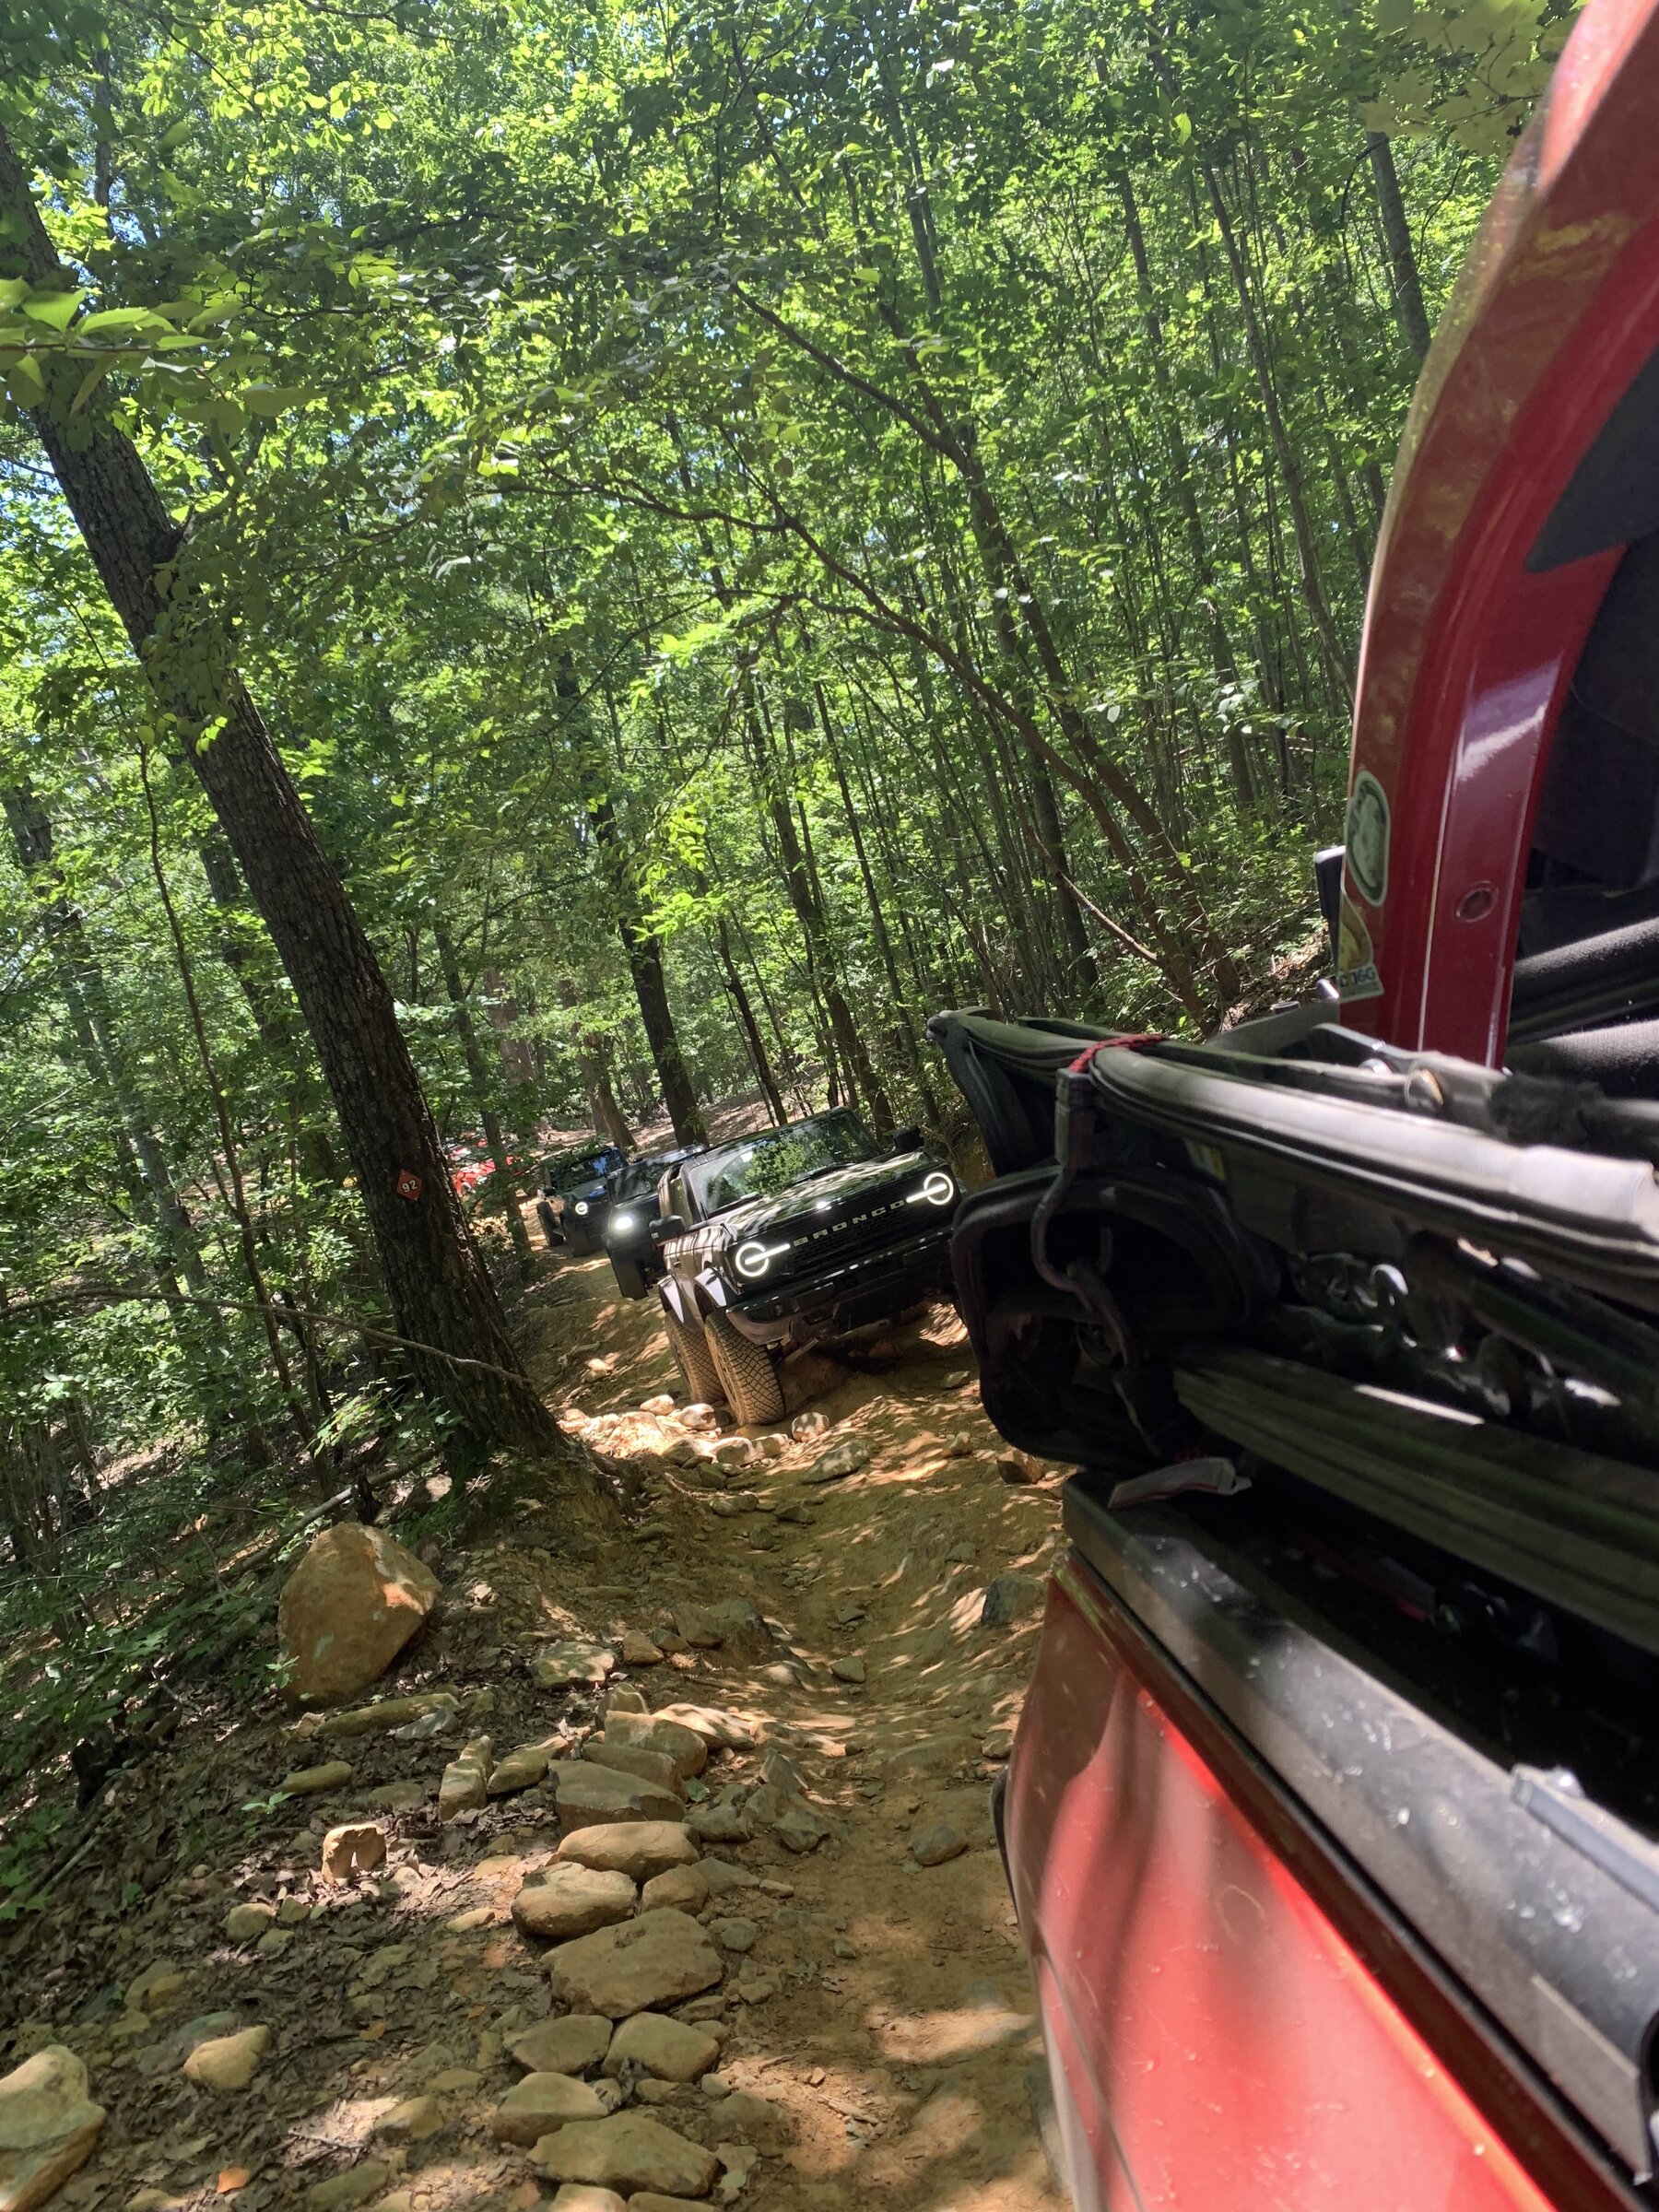 Ford Bronco Biggest Bronco day at Uwharrie National Forest yet 462B1816-242B-4CC2-97EF-4A68F2E8B8BD